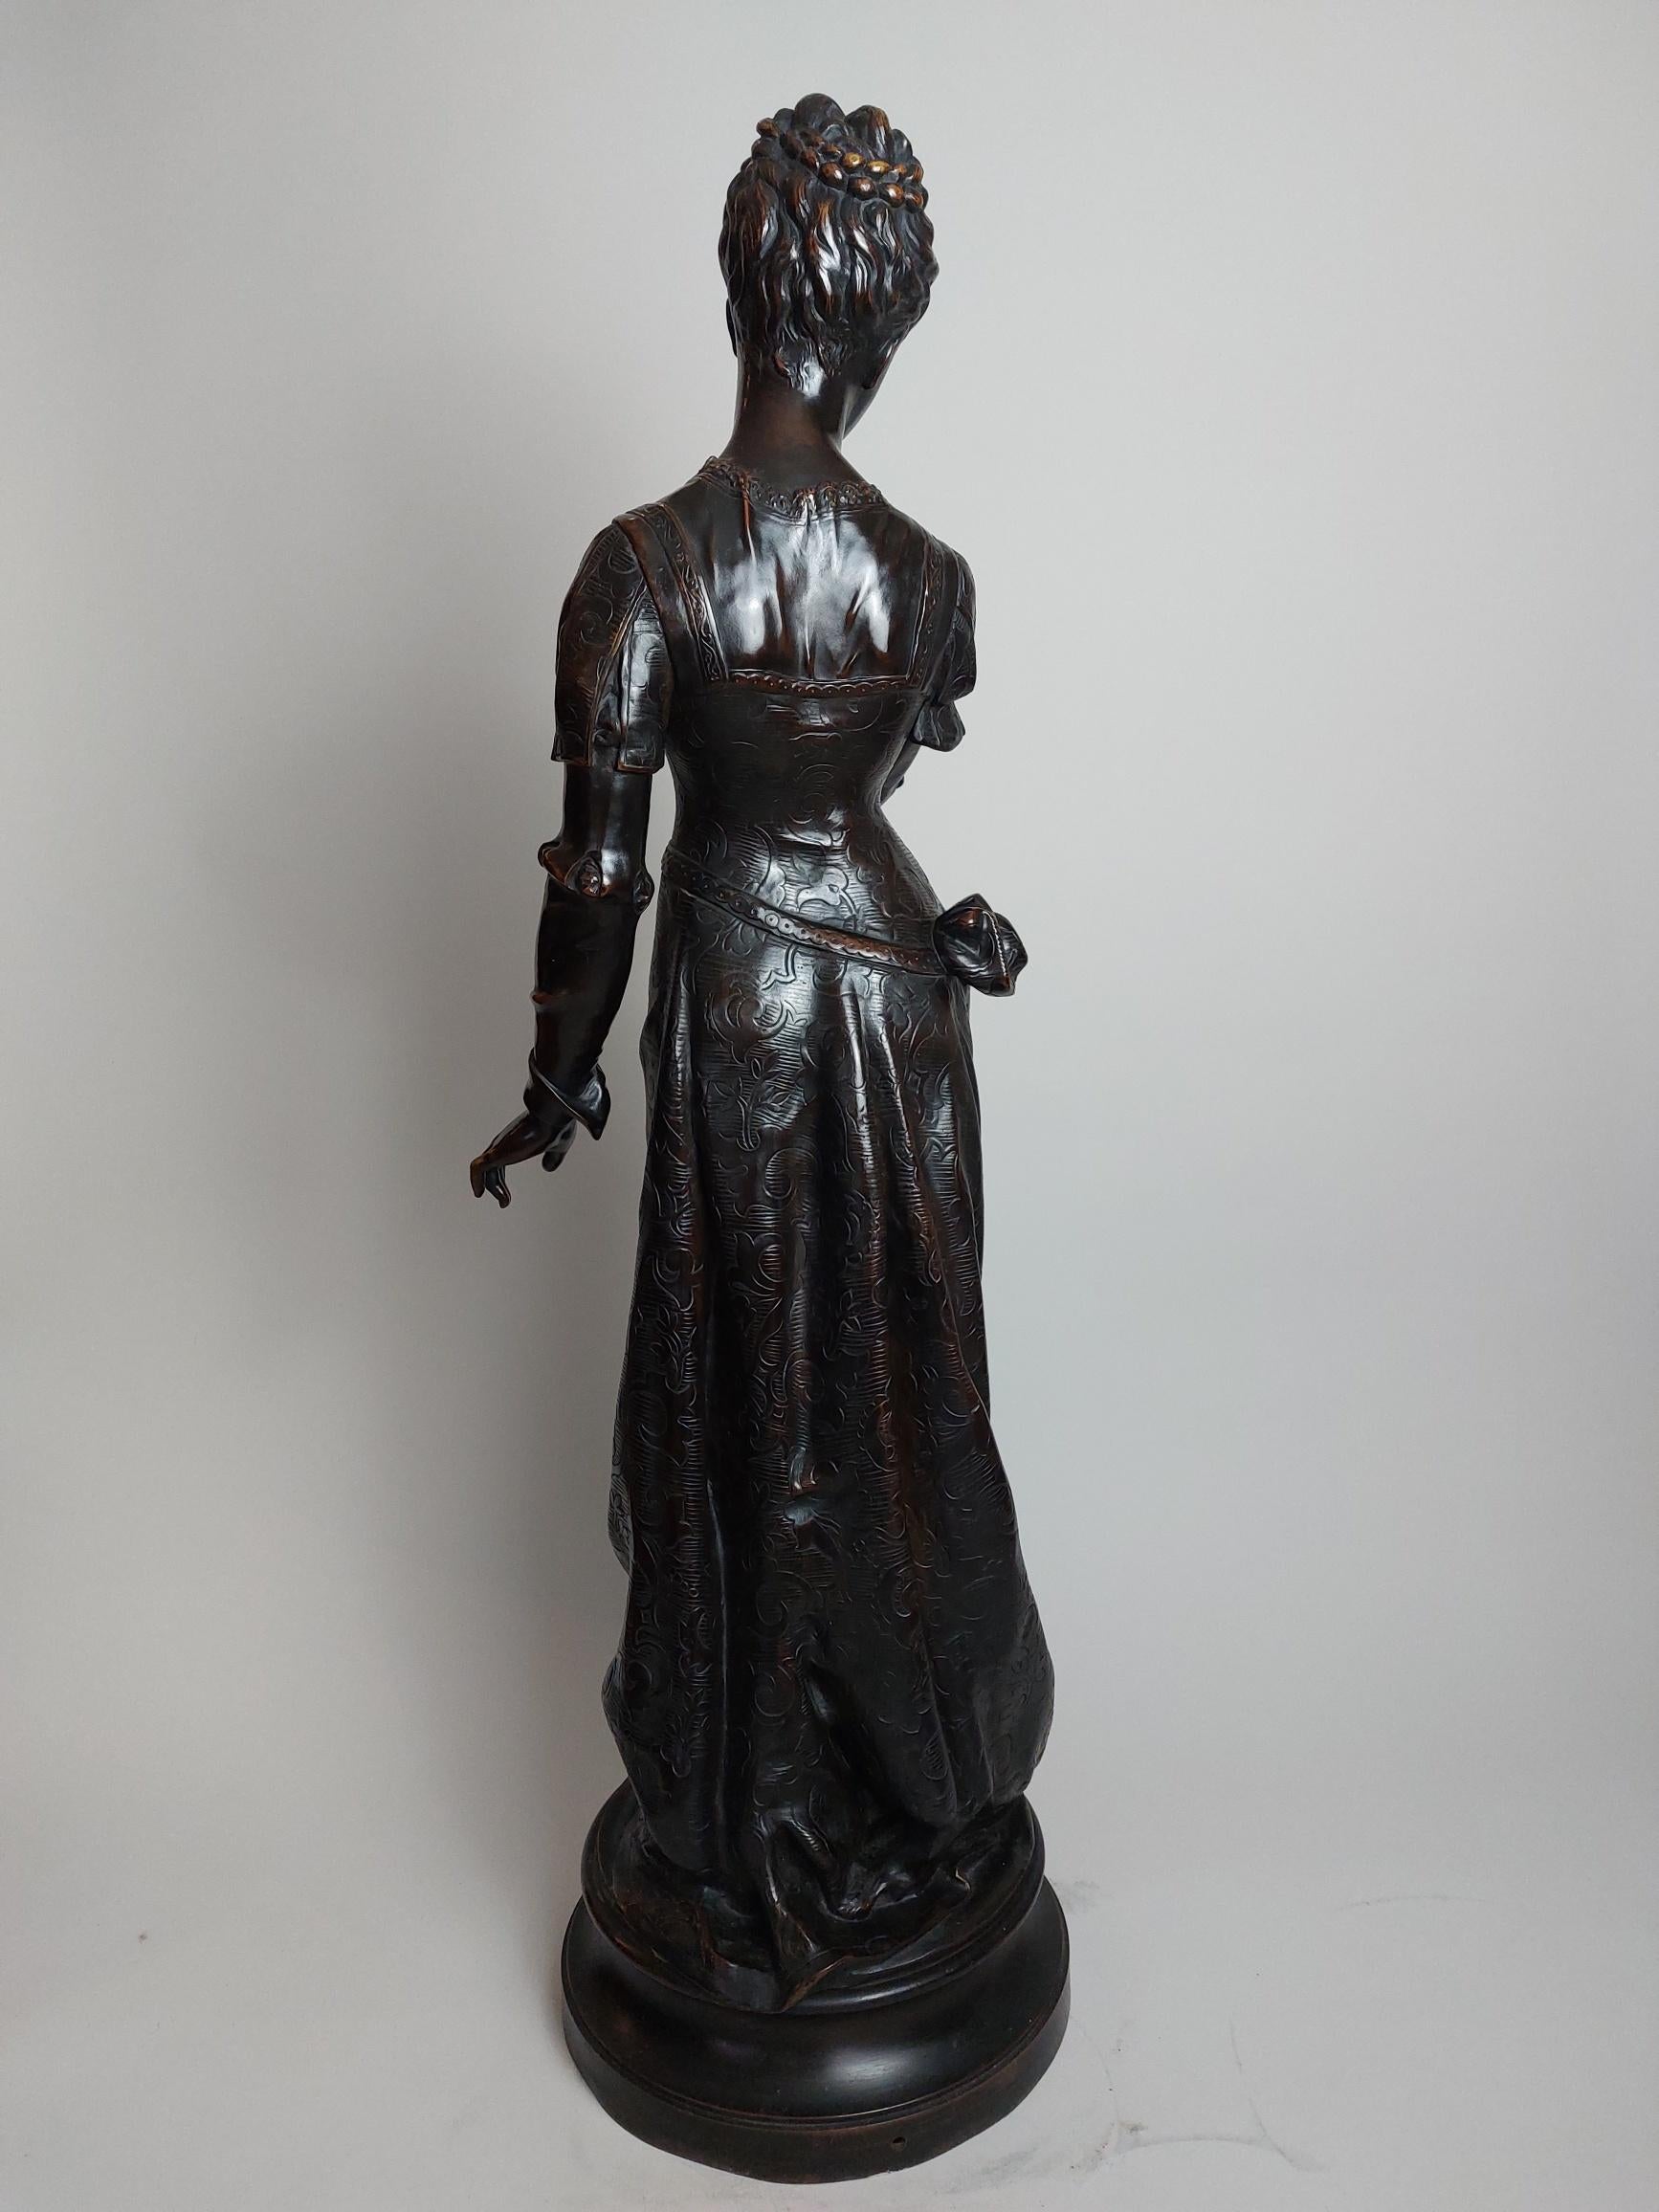 A classical 19th century French bronze titled ‘Autumn’ signed Detrier.

She stands in classical garments, with one hand quizzically raised to her chin.

Pierre Louis Detrier (1897-1922)
Detrier was a French sculptor known for his classical